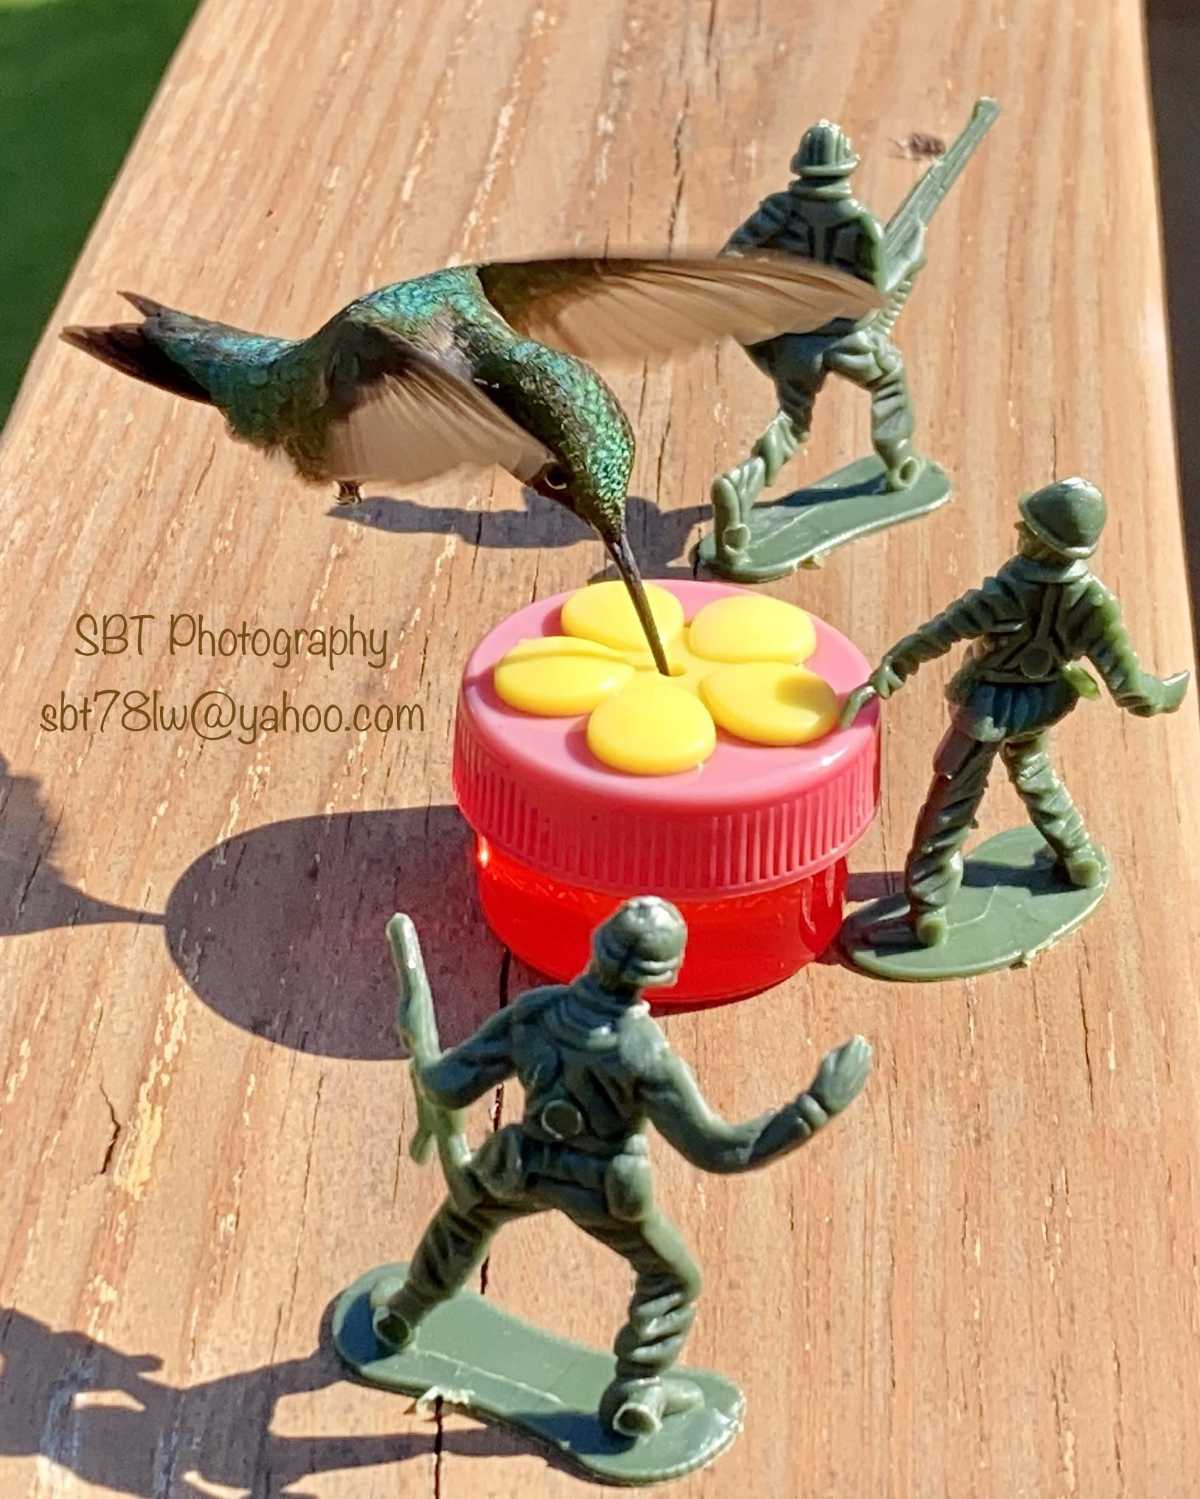 I put army men and other silly props next to my hummingbird feeder. Here’s one of many results